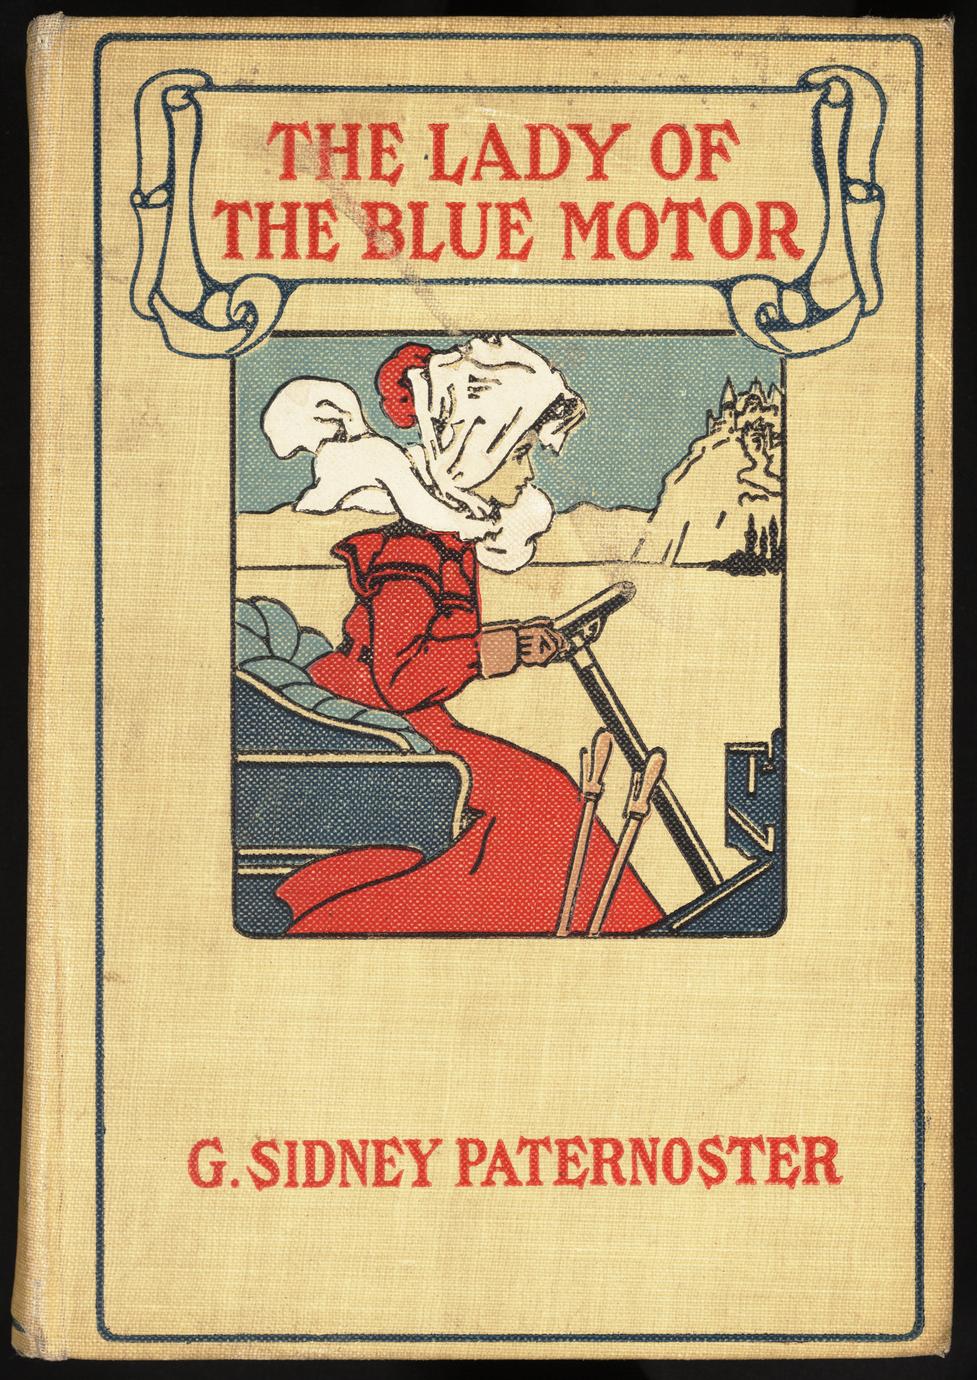 The lady of the blue motor (1 of 2)